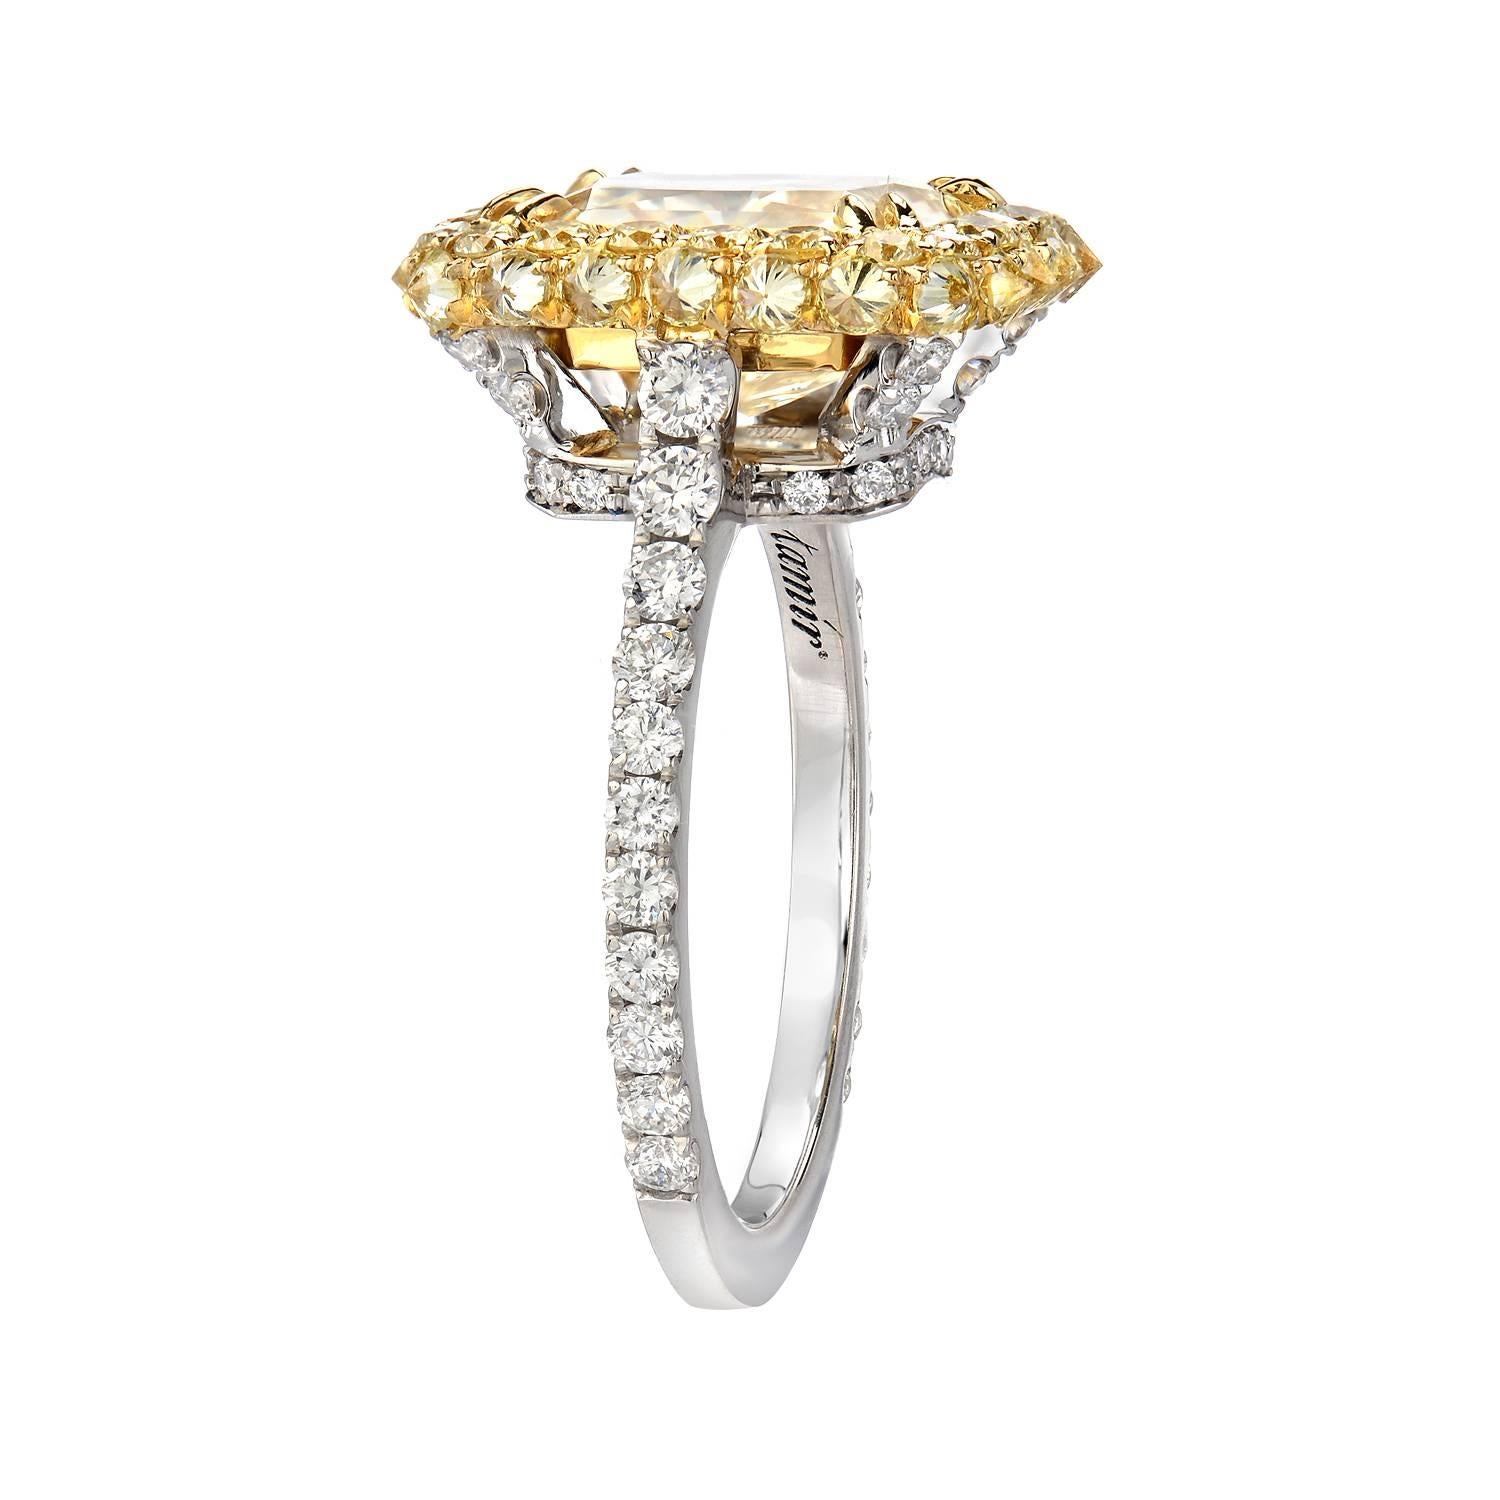 Supreme GIA certified 3.78 carat natural Fancy Light Yellow diamond radiant cut ring. This exceptional 3.78 carat diamond is surrounded by a total of 0.88 carat round brilliant fancy yellow diamonds, set inversely on the sides. The platinum shank is